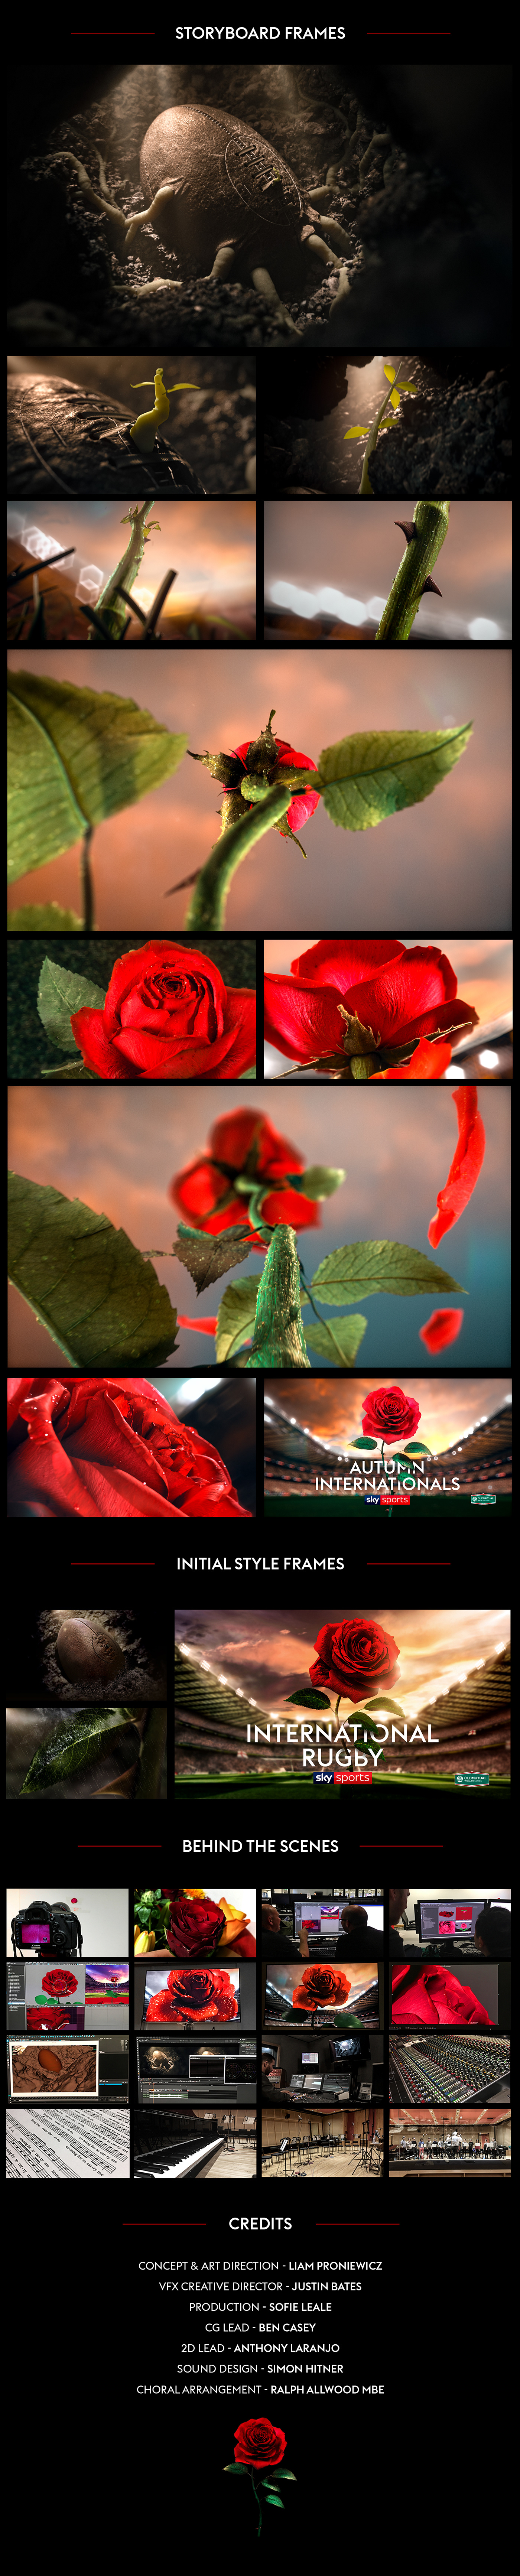 England Rugby Rugby Sky Sports rose autumn internationals Twickenham title sequence titles Film   CGI